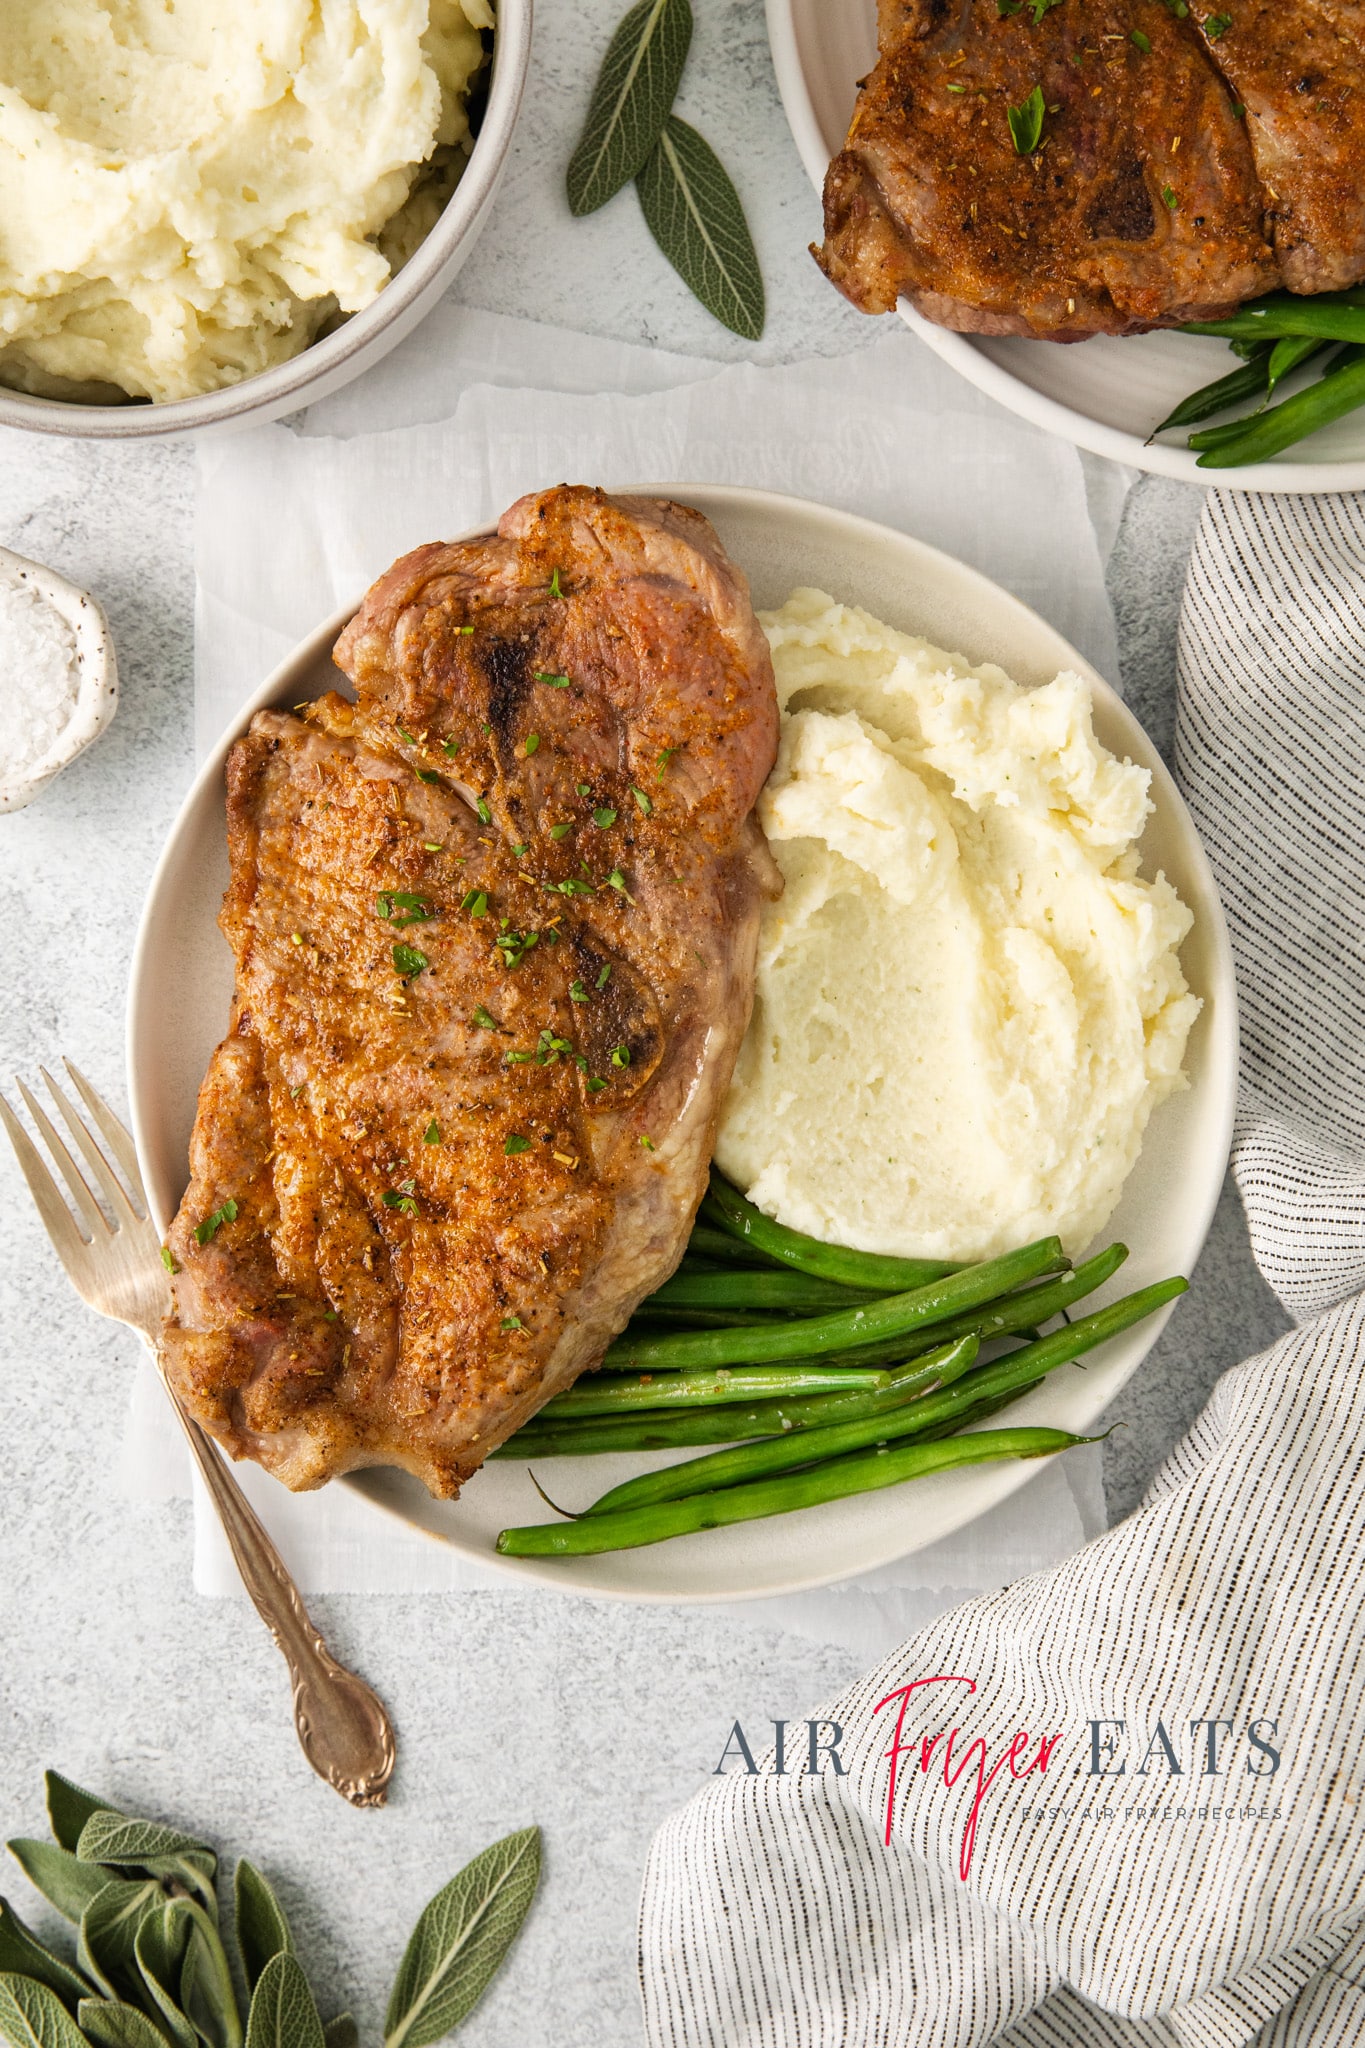 Top view photo of a plate with an Air Fryer Pork Steak, mashed potatoes, and green beans, ready to enjoy. 